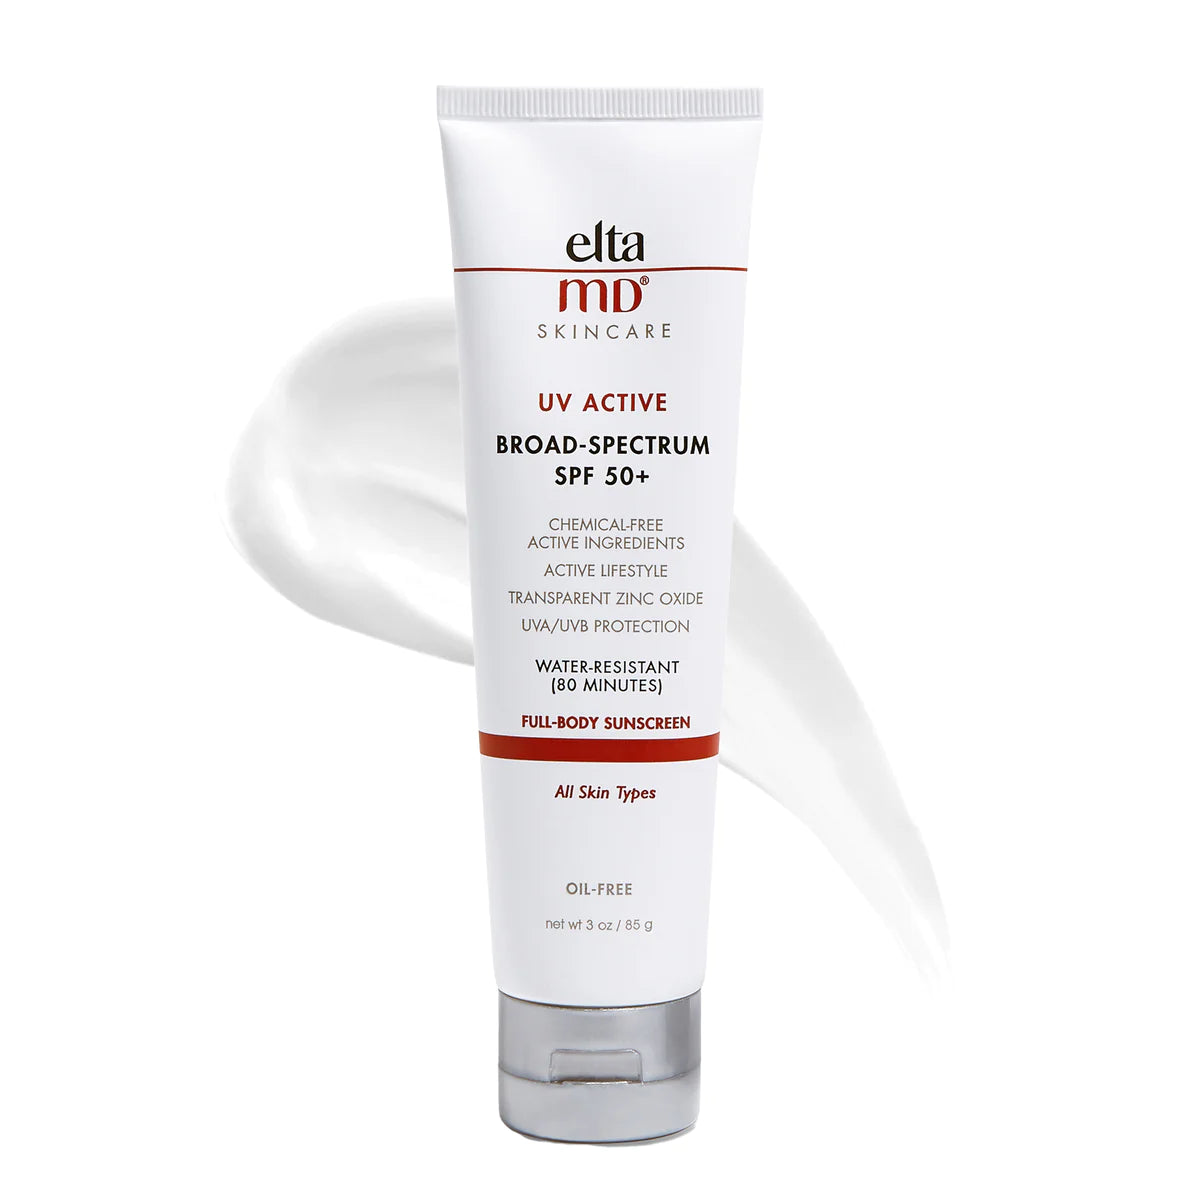 EltaMD UV Active Broad Spectrum SPF 50+ with dab of lotion behind it